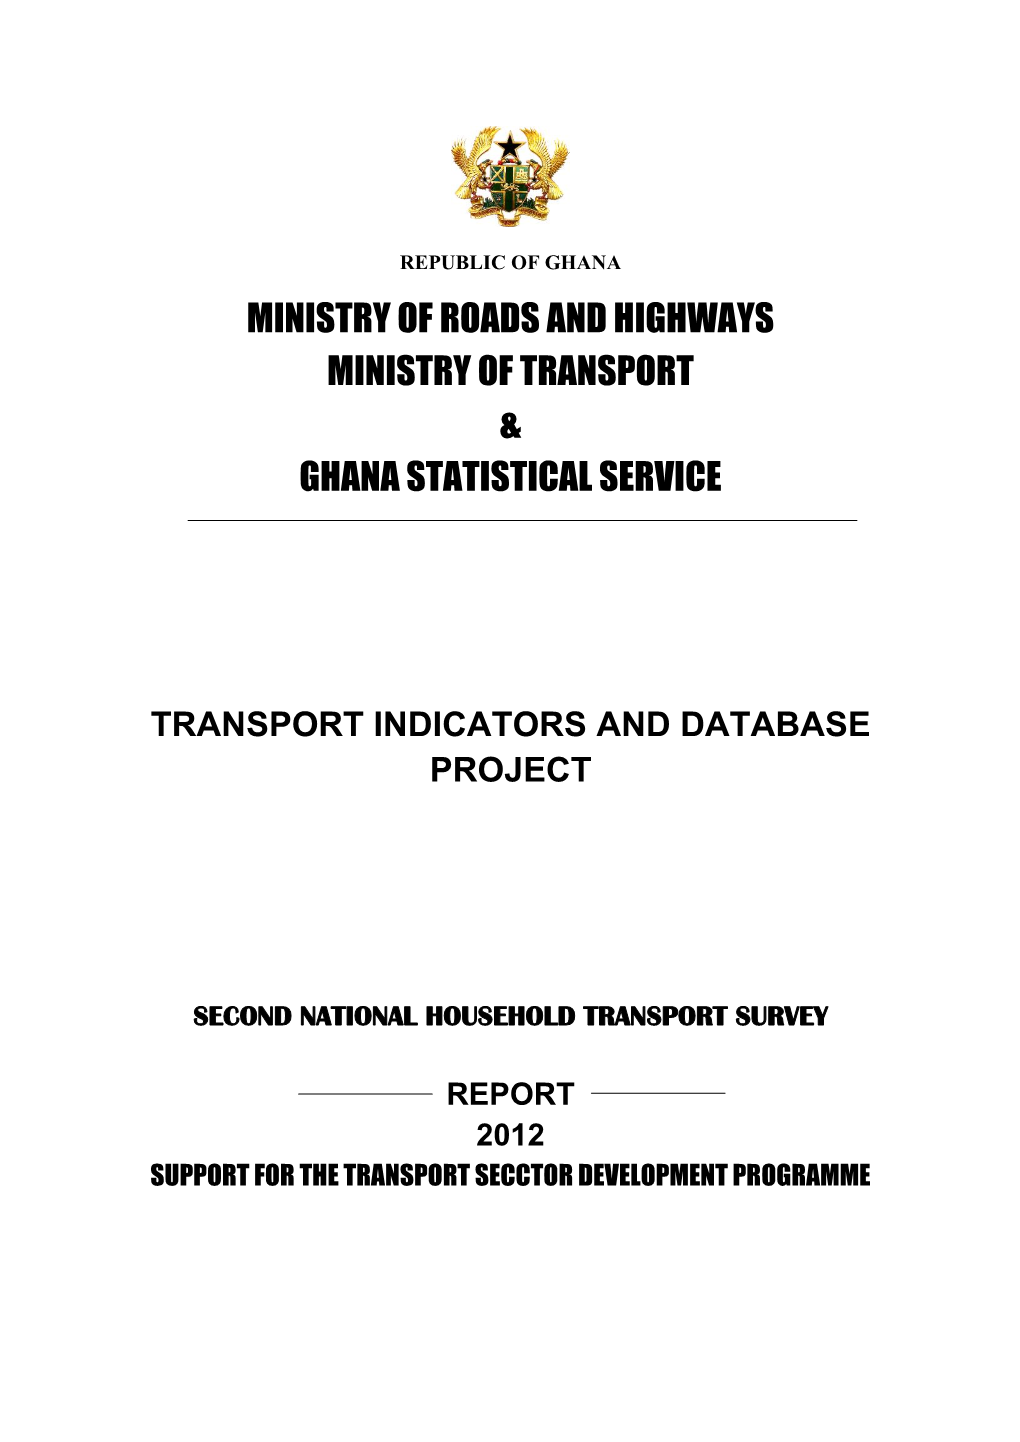 Ministry of Roads and Highways Ministry of Transport & Ghana